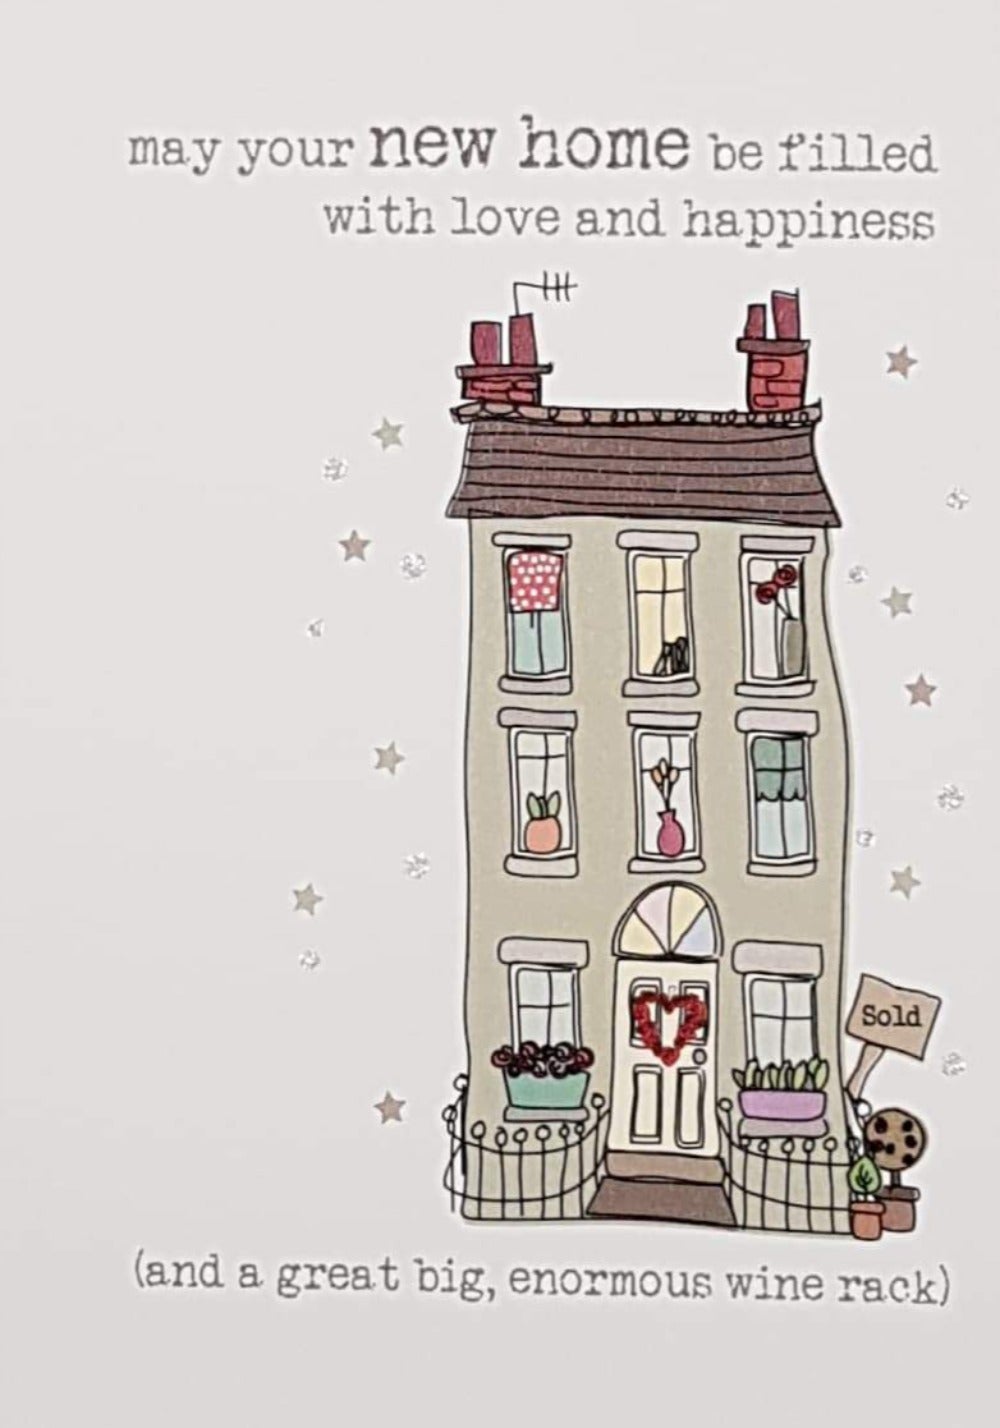 New Home Card - May Your New Home Be Filled With Love...